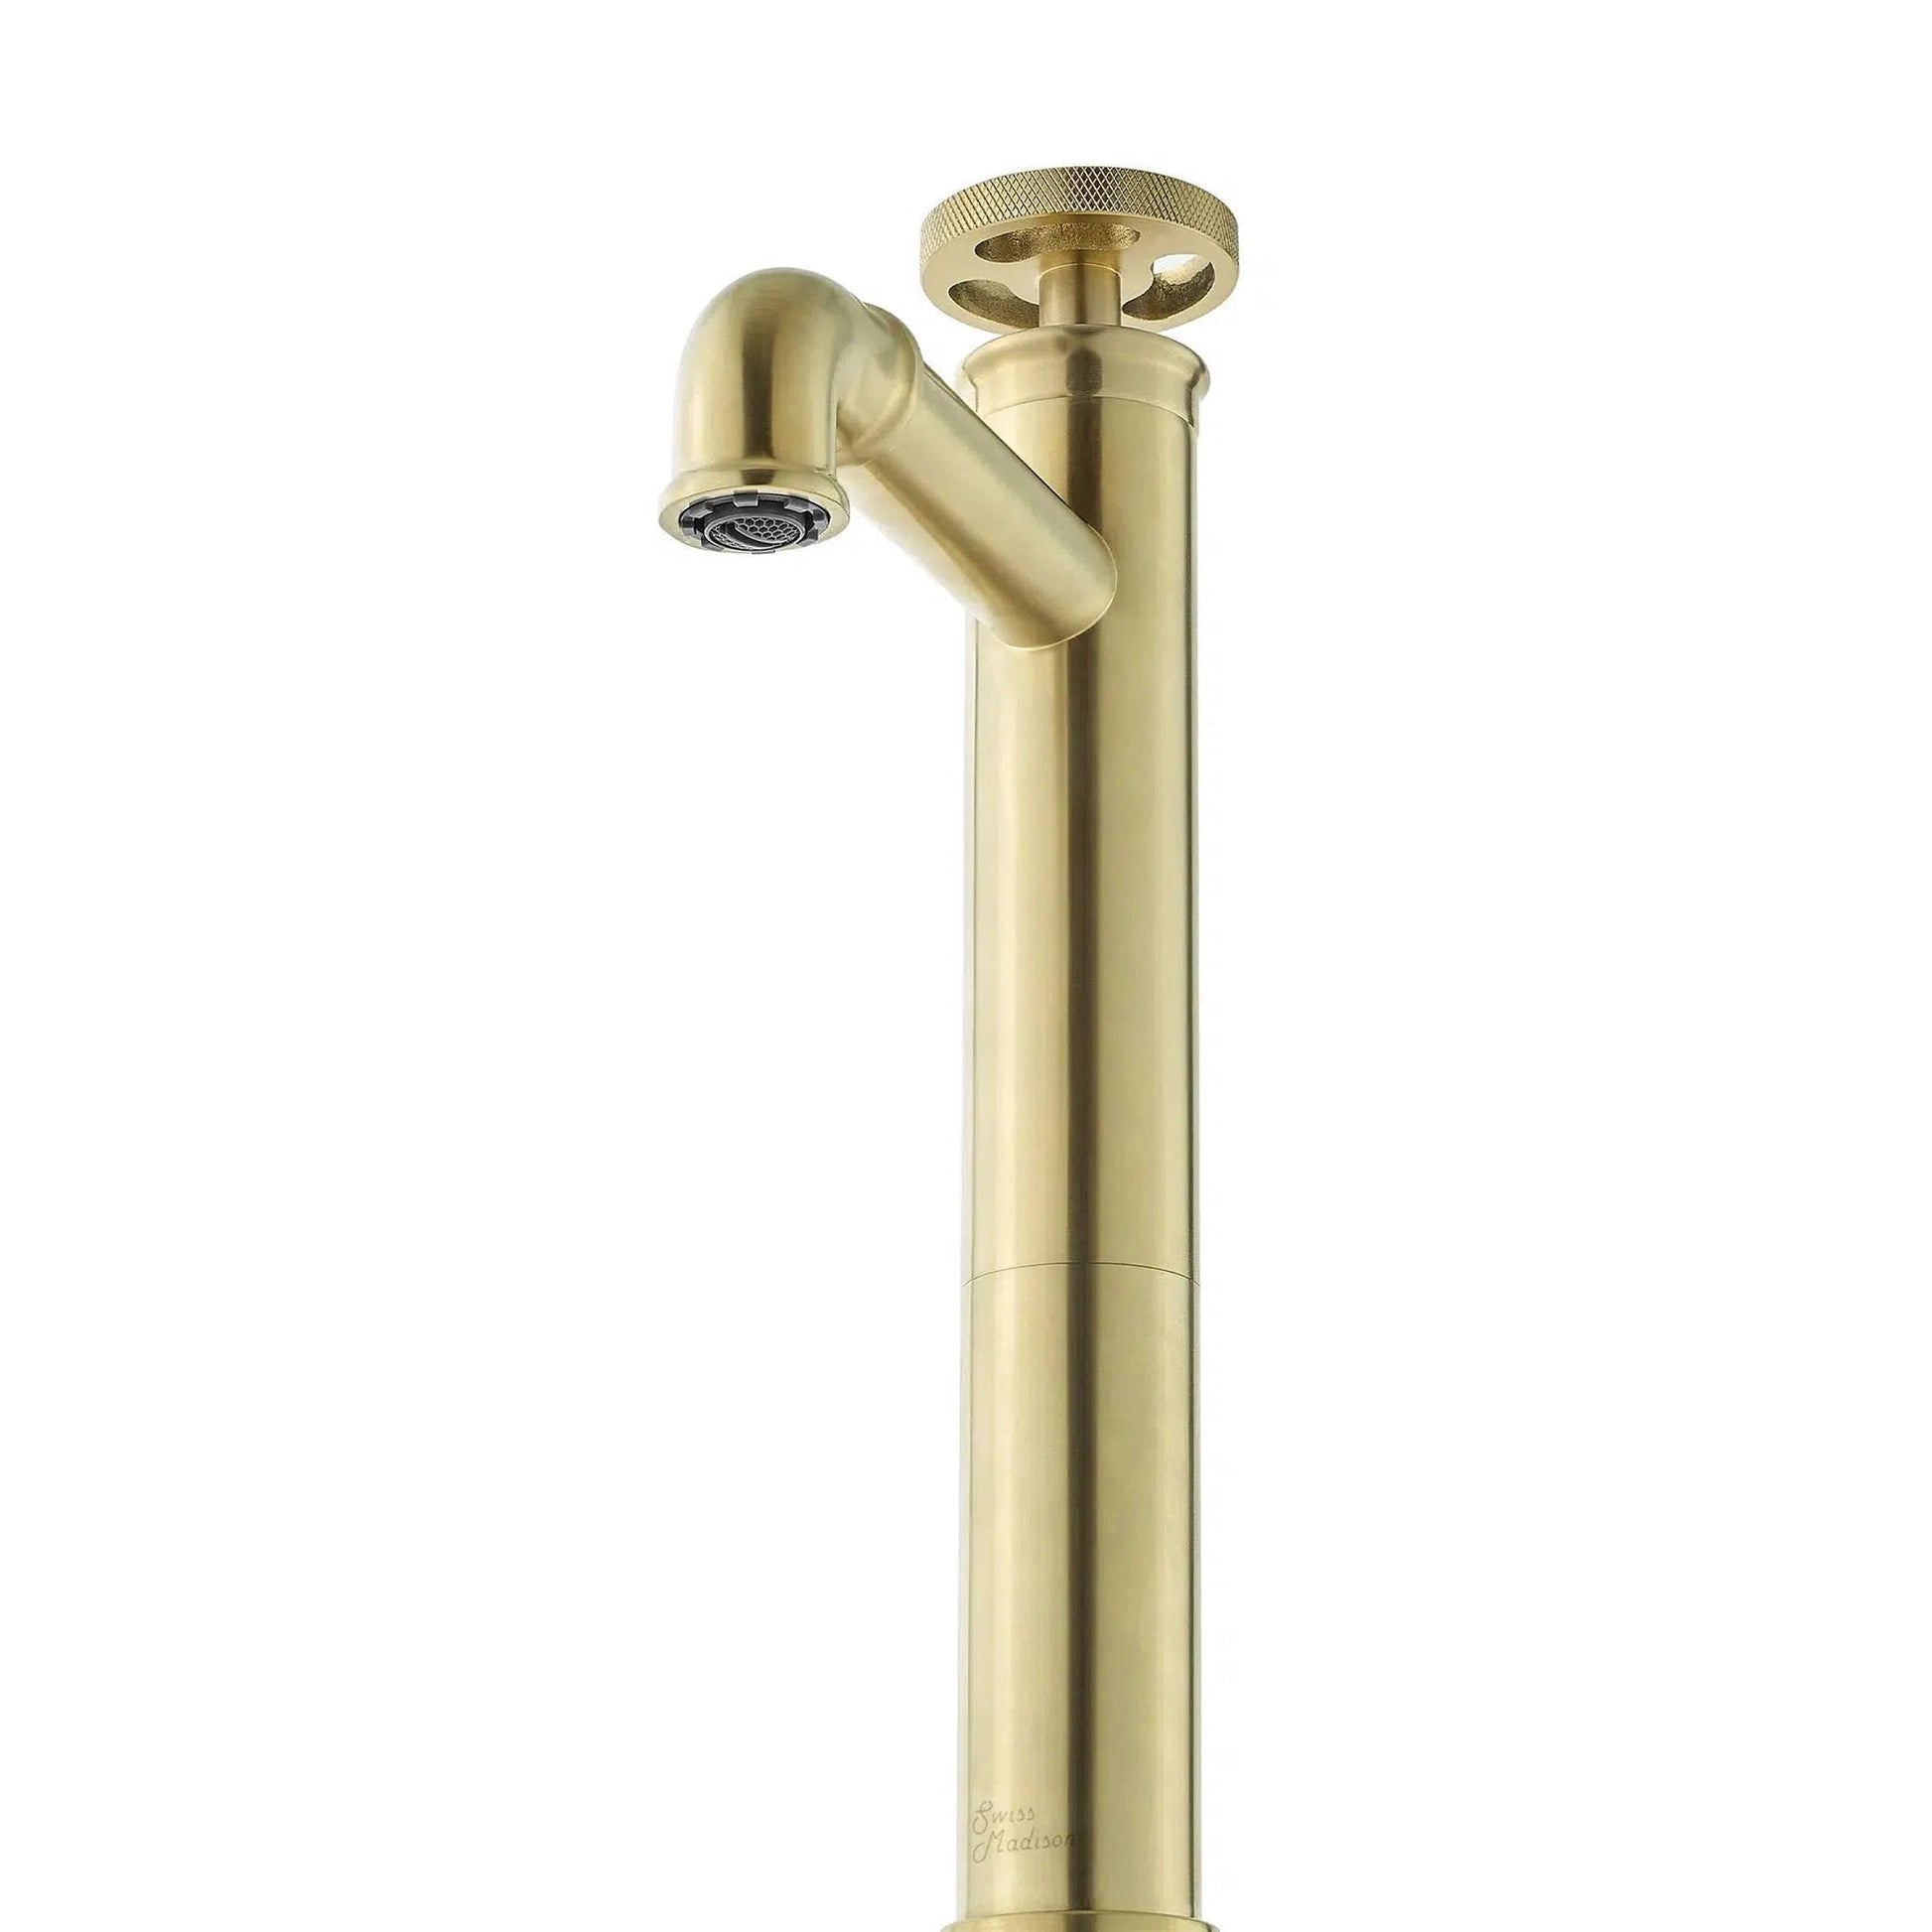 Swiss Madison Avallon 12" Single-Handle Brushed Gold Bathroom Faucet With 1.2 GPM Flow Rate